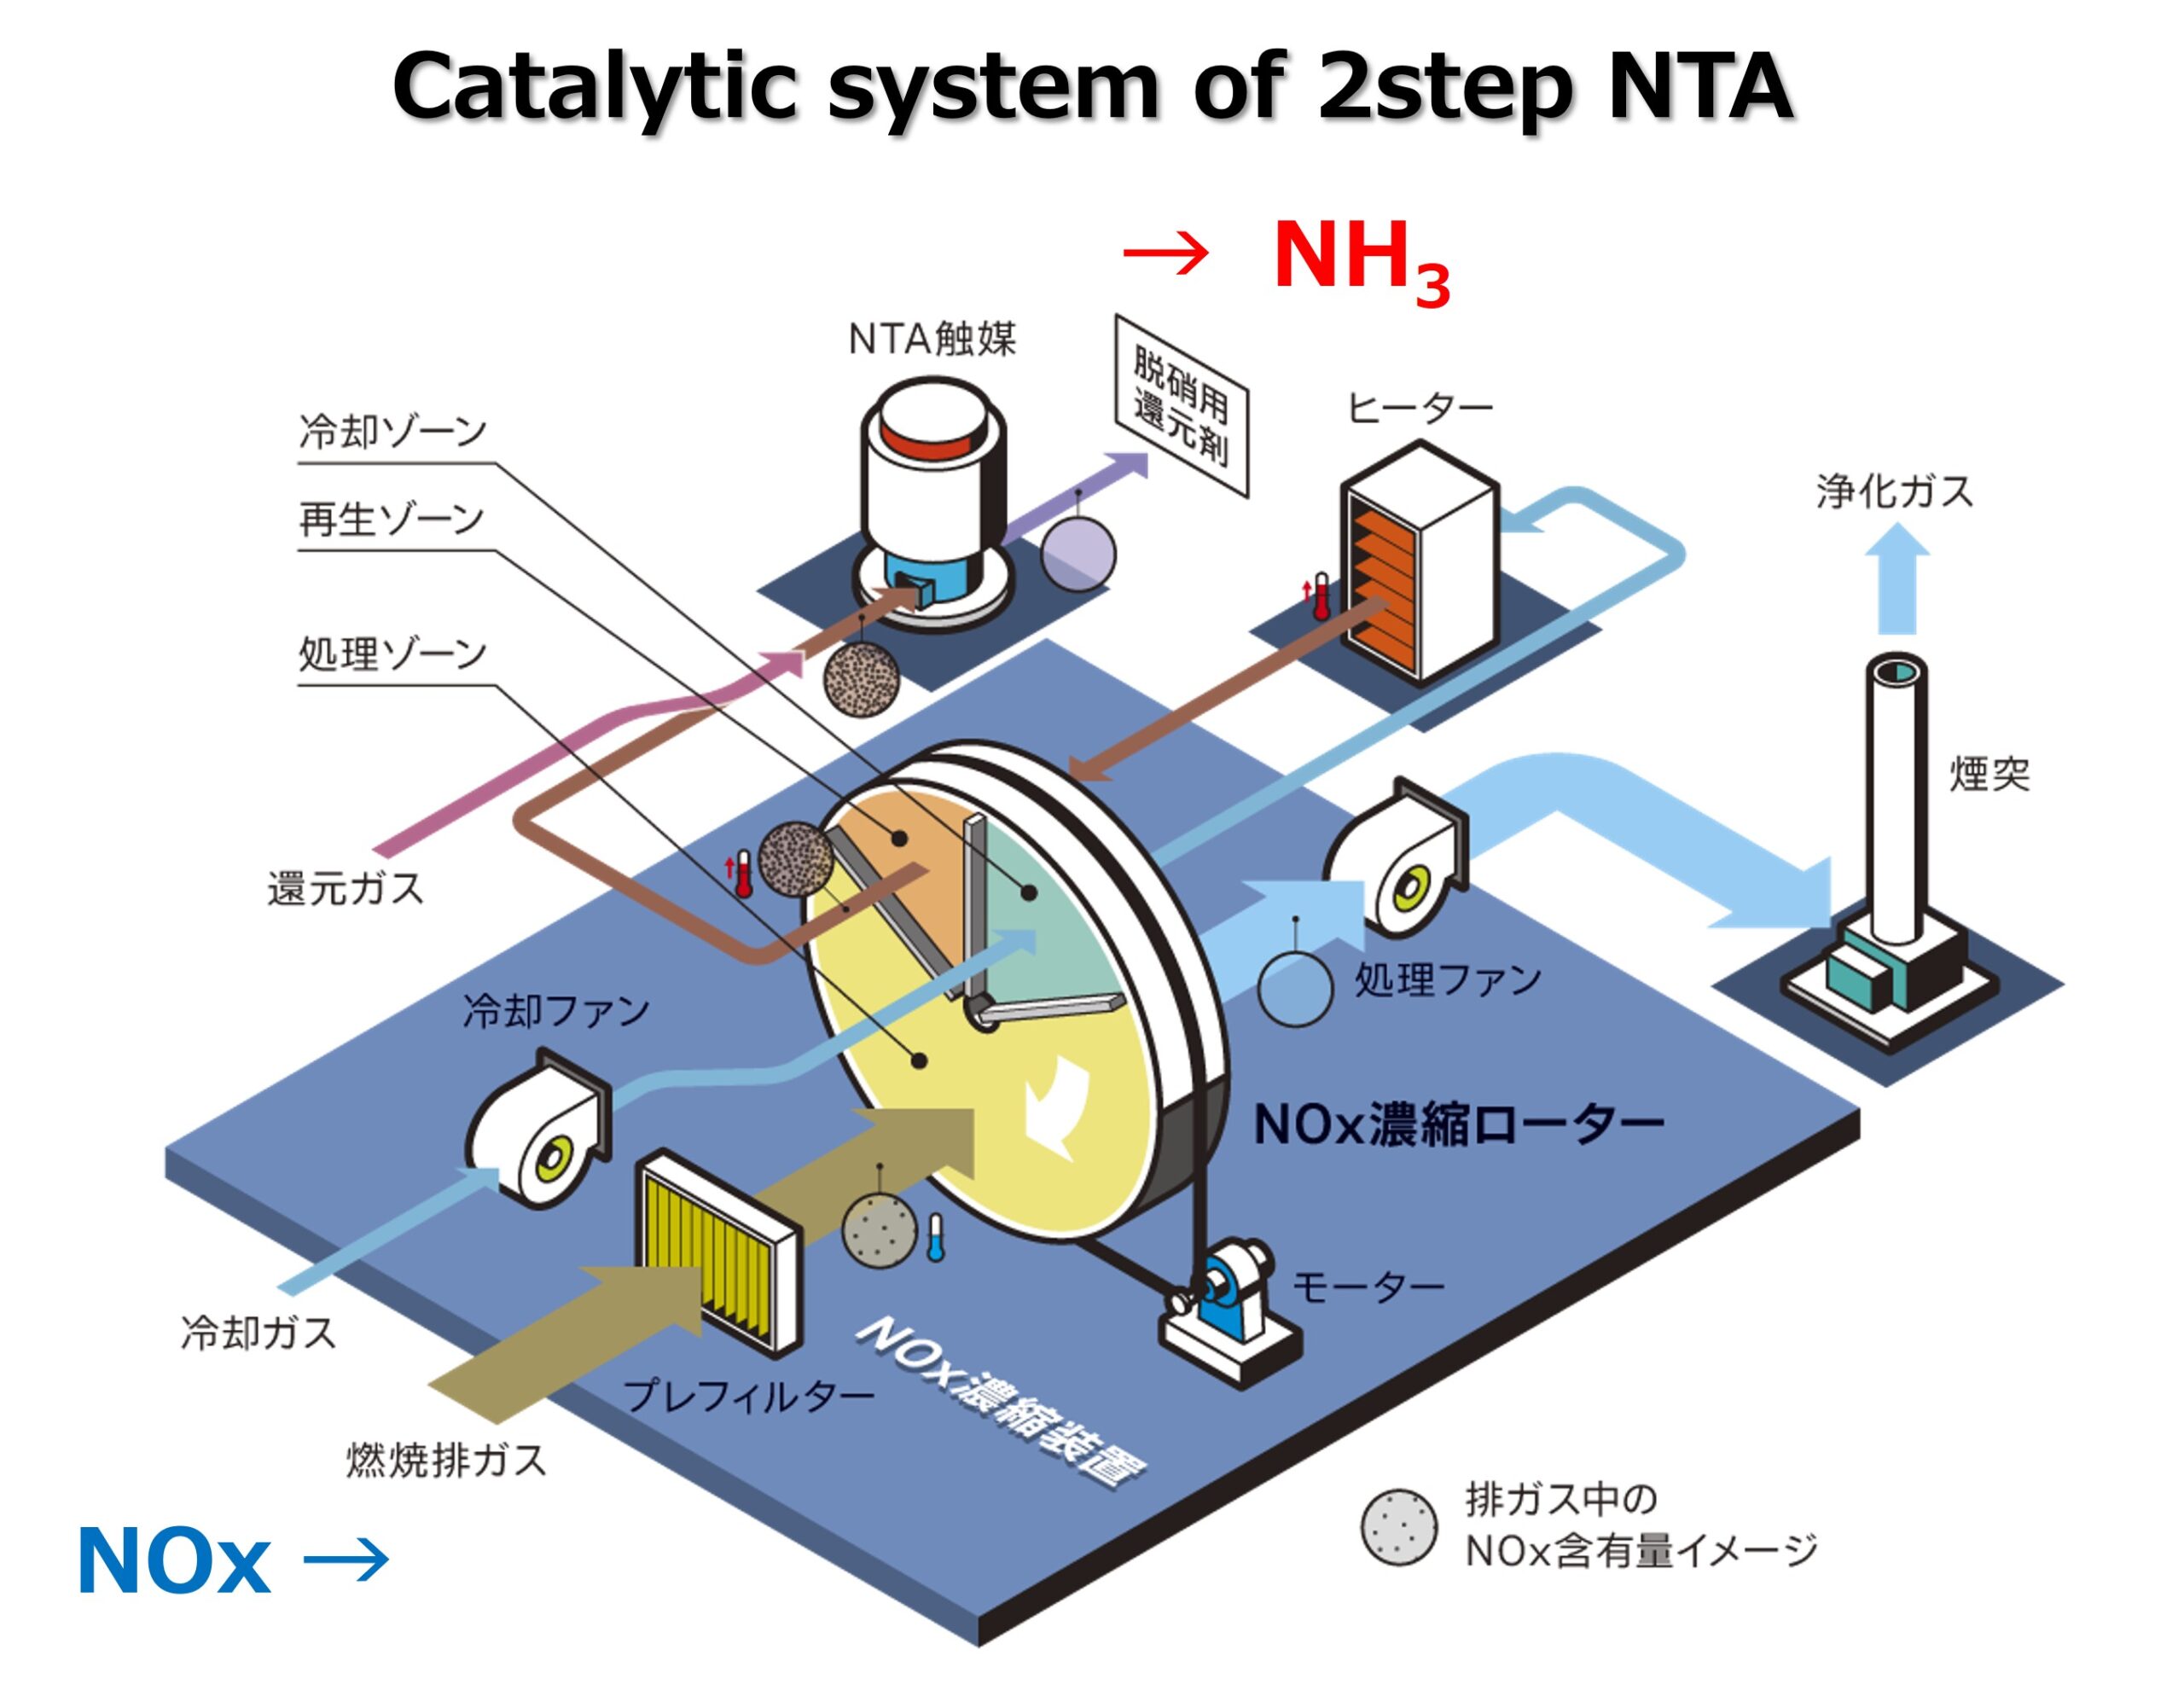 Catalytic system of 2step NTA